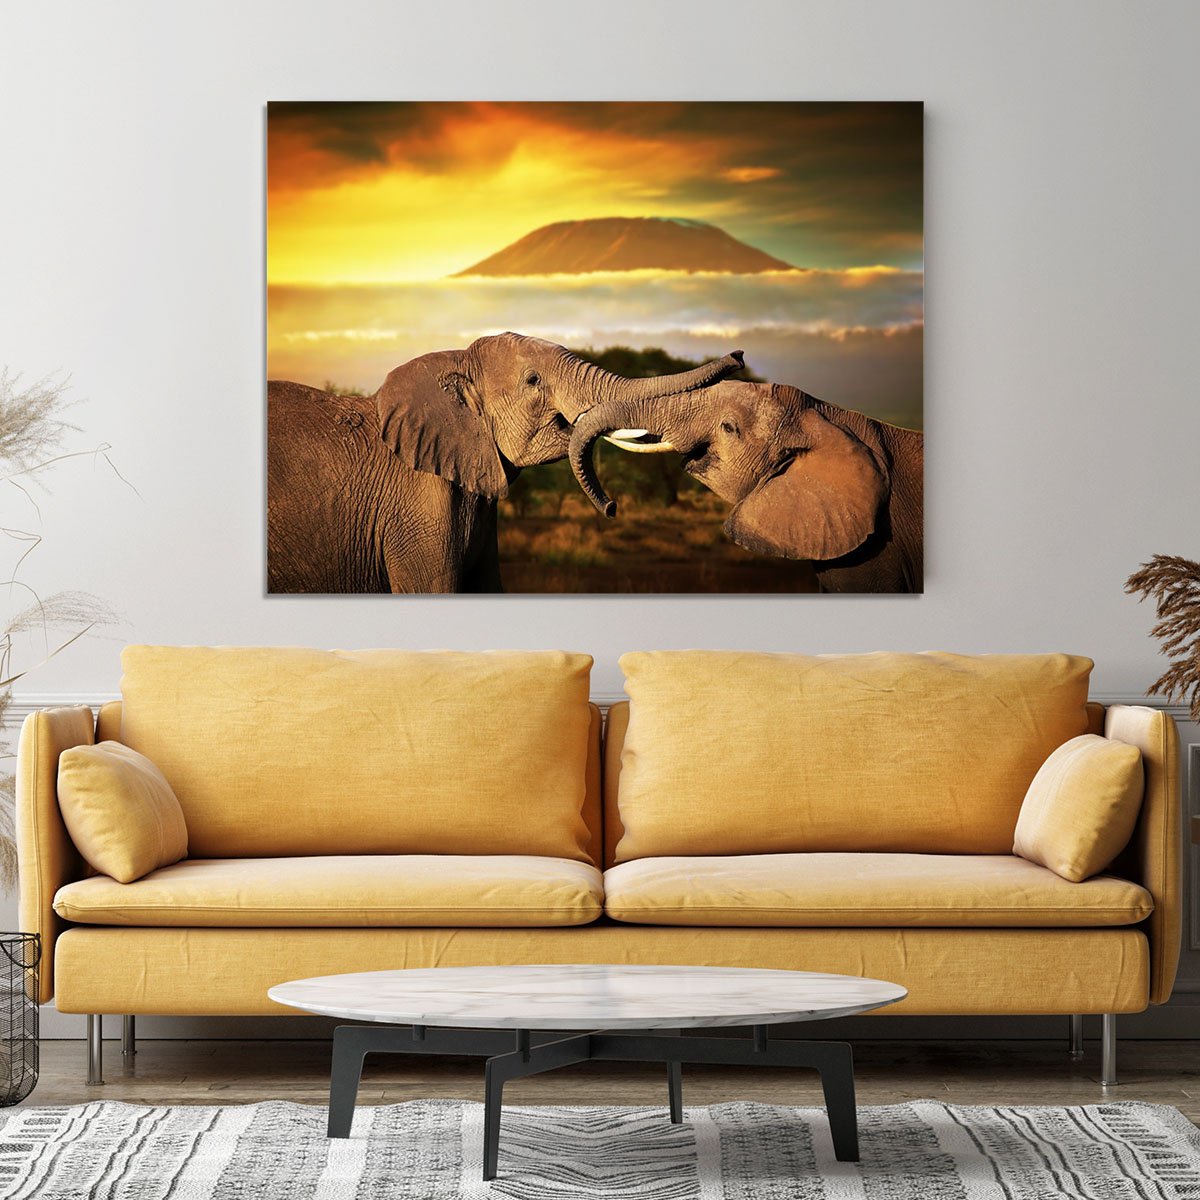 Elephants playing with their trunks Canvas Print or Poster